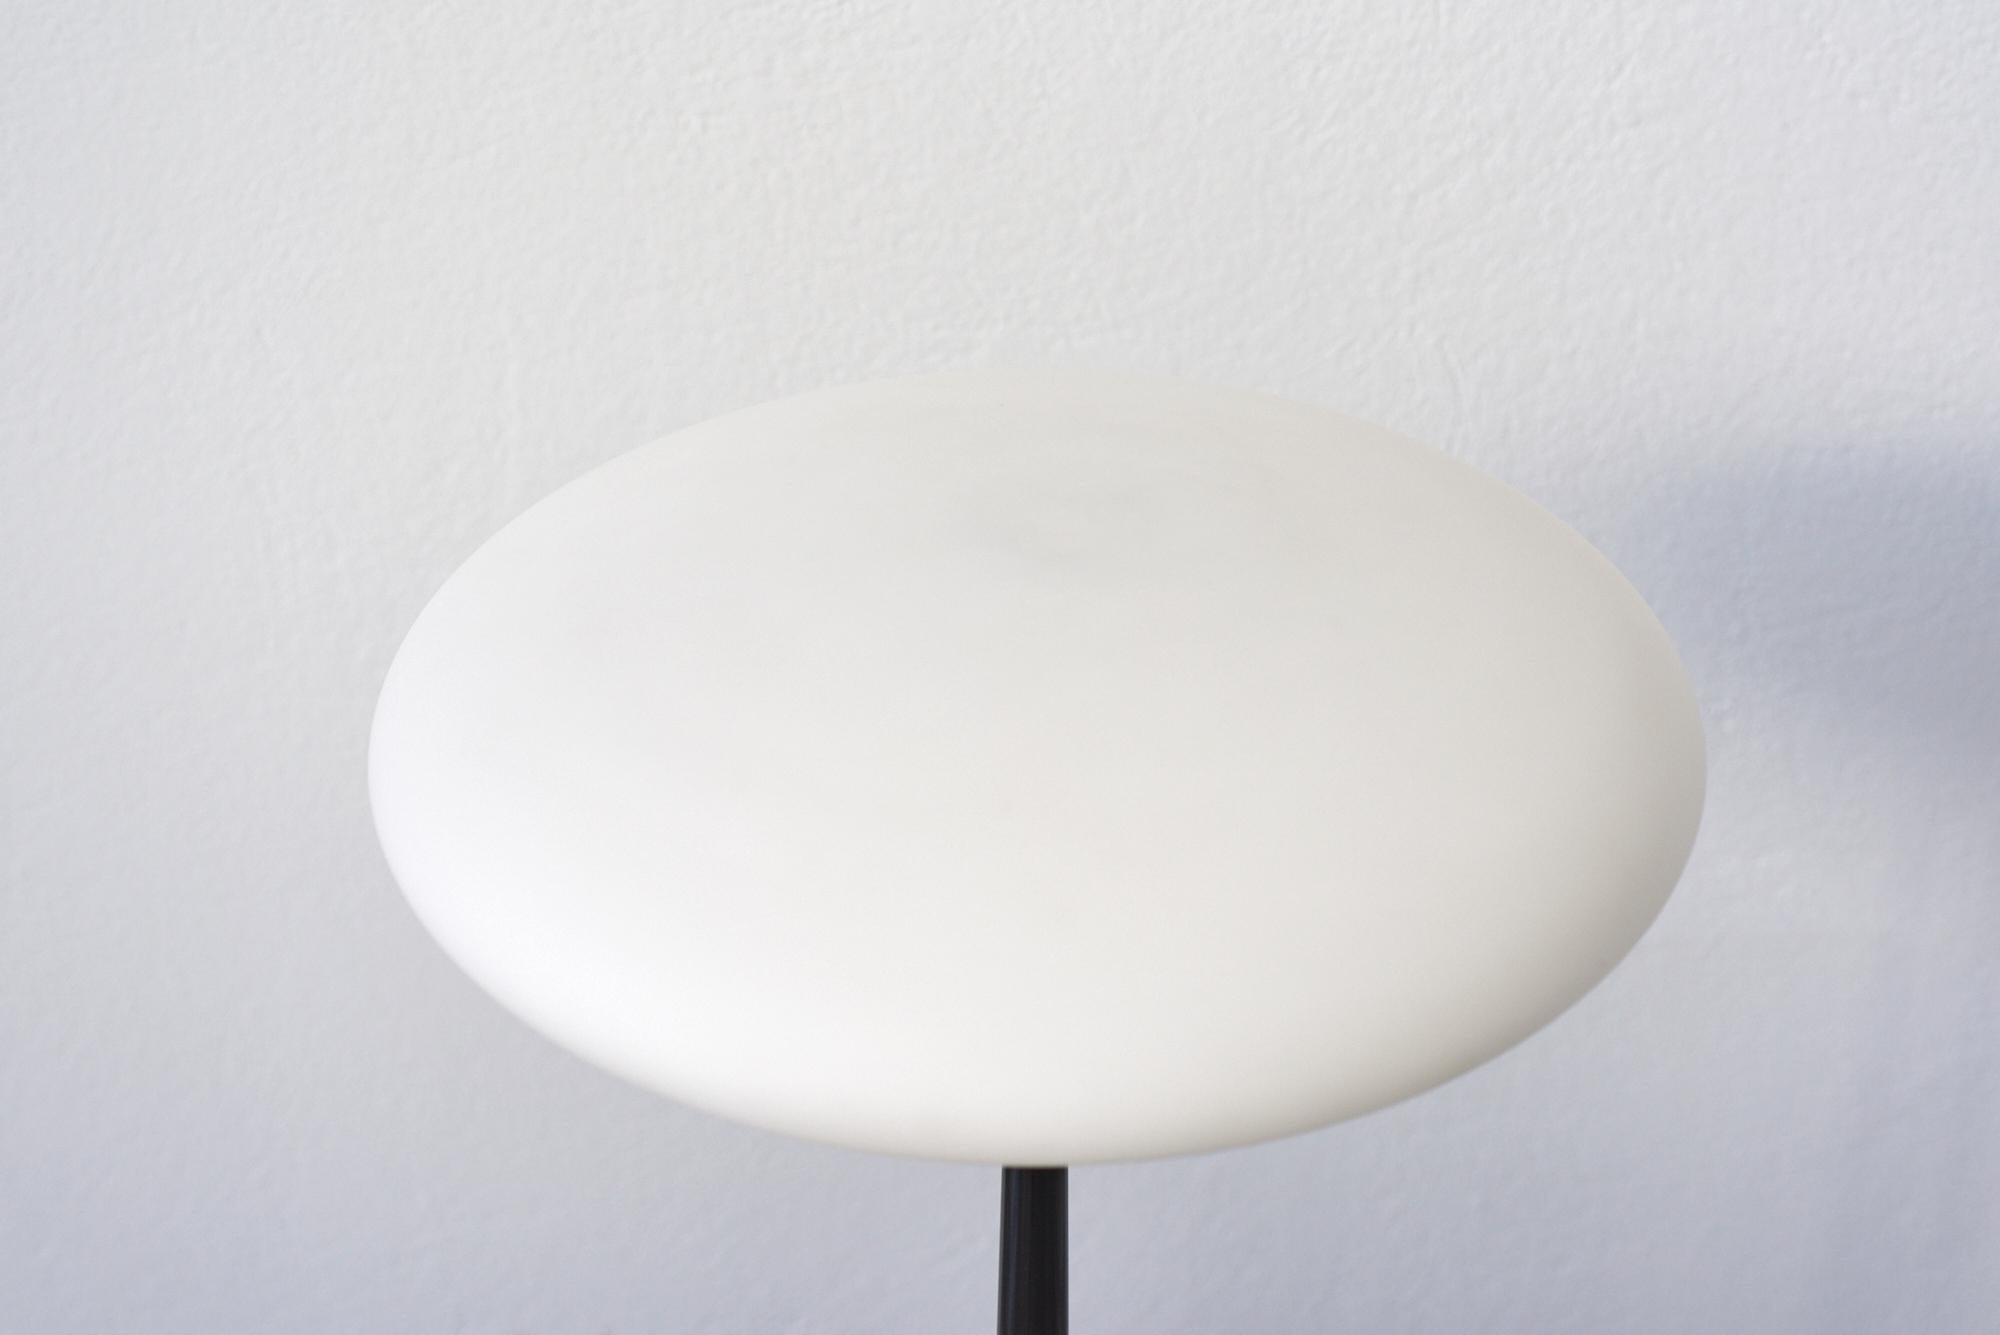 Lacquered Pao table lamp by Matteo Thun for Arteluce, 1993 For Sale